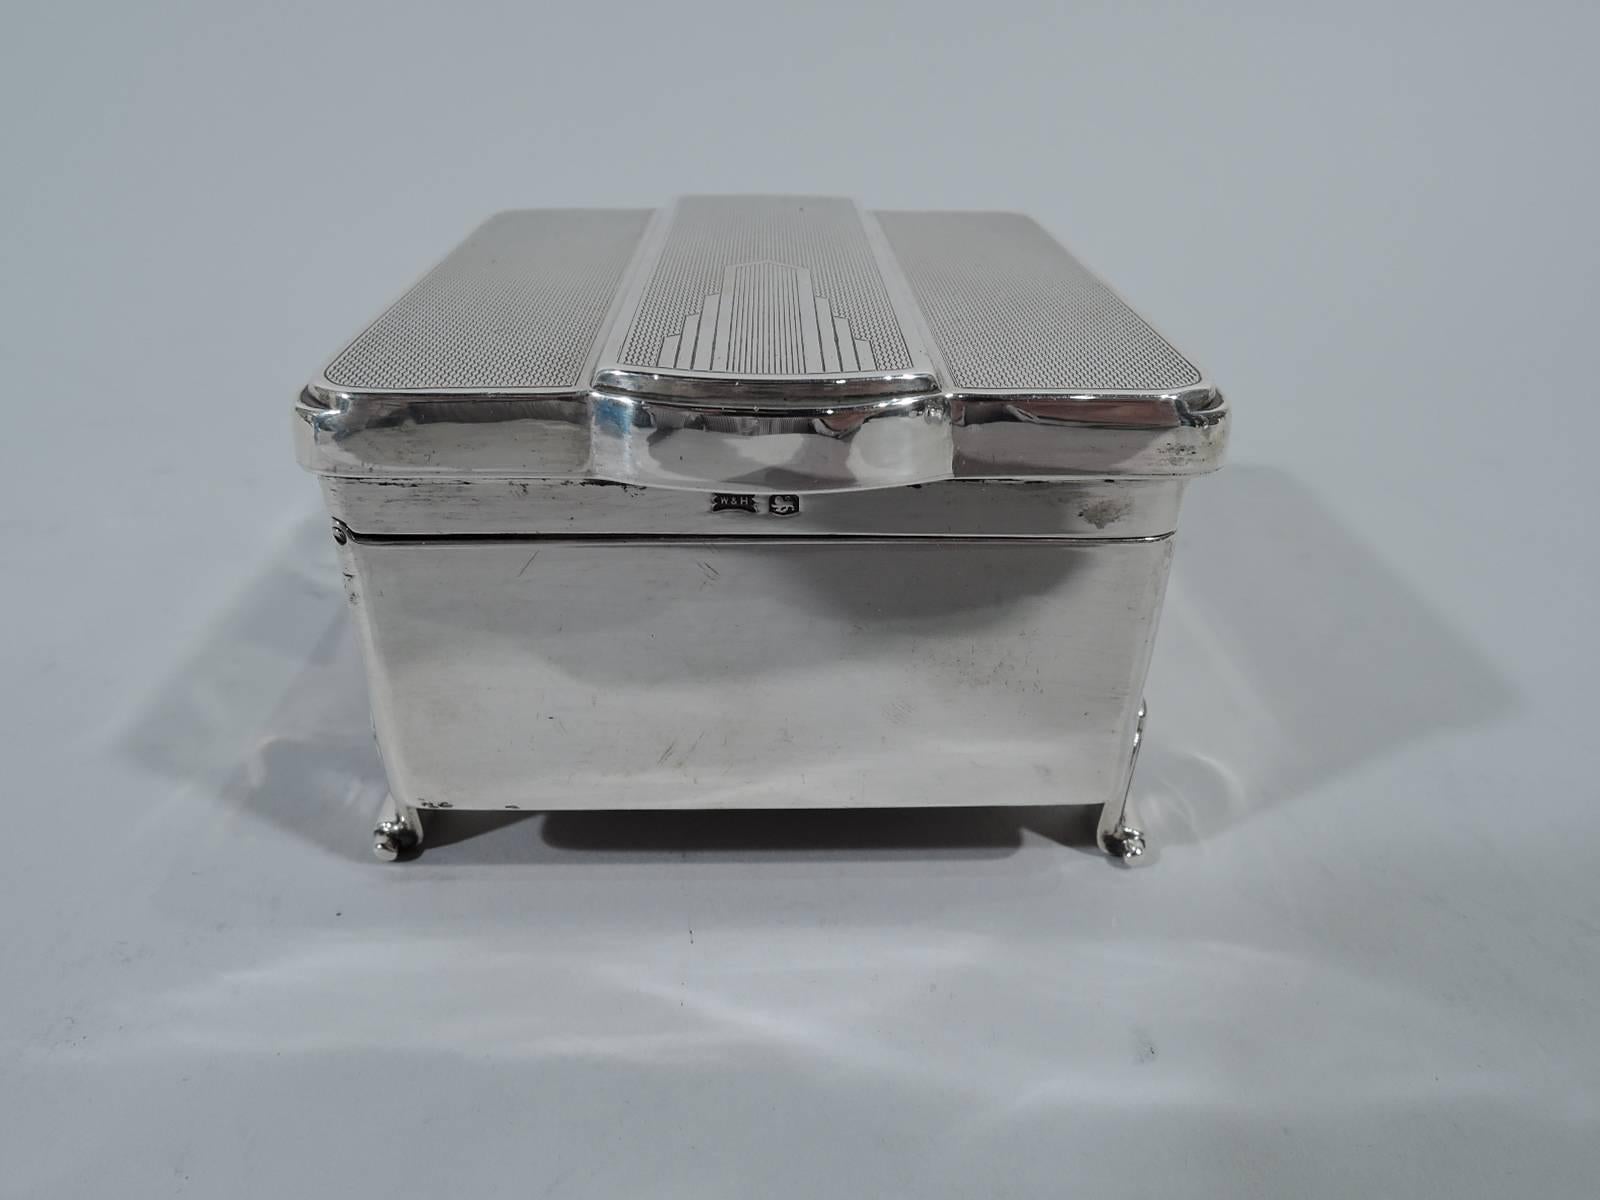 George VI sterling silver jewelry box. Made by Walker & Hall in Sheffield in 1939. Square with straight sides and four pilaster supports terminating in volute scrolls. Cover hinged with allover engine-turned ornament. Raised central strip has